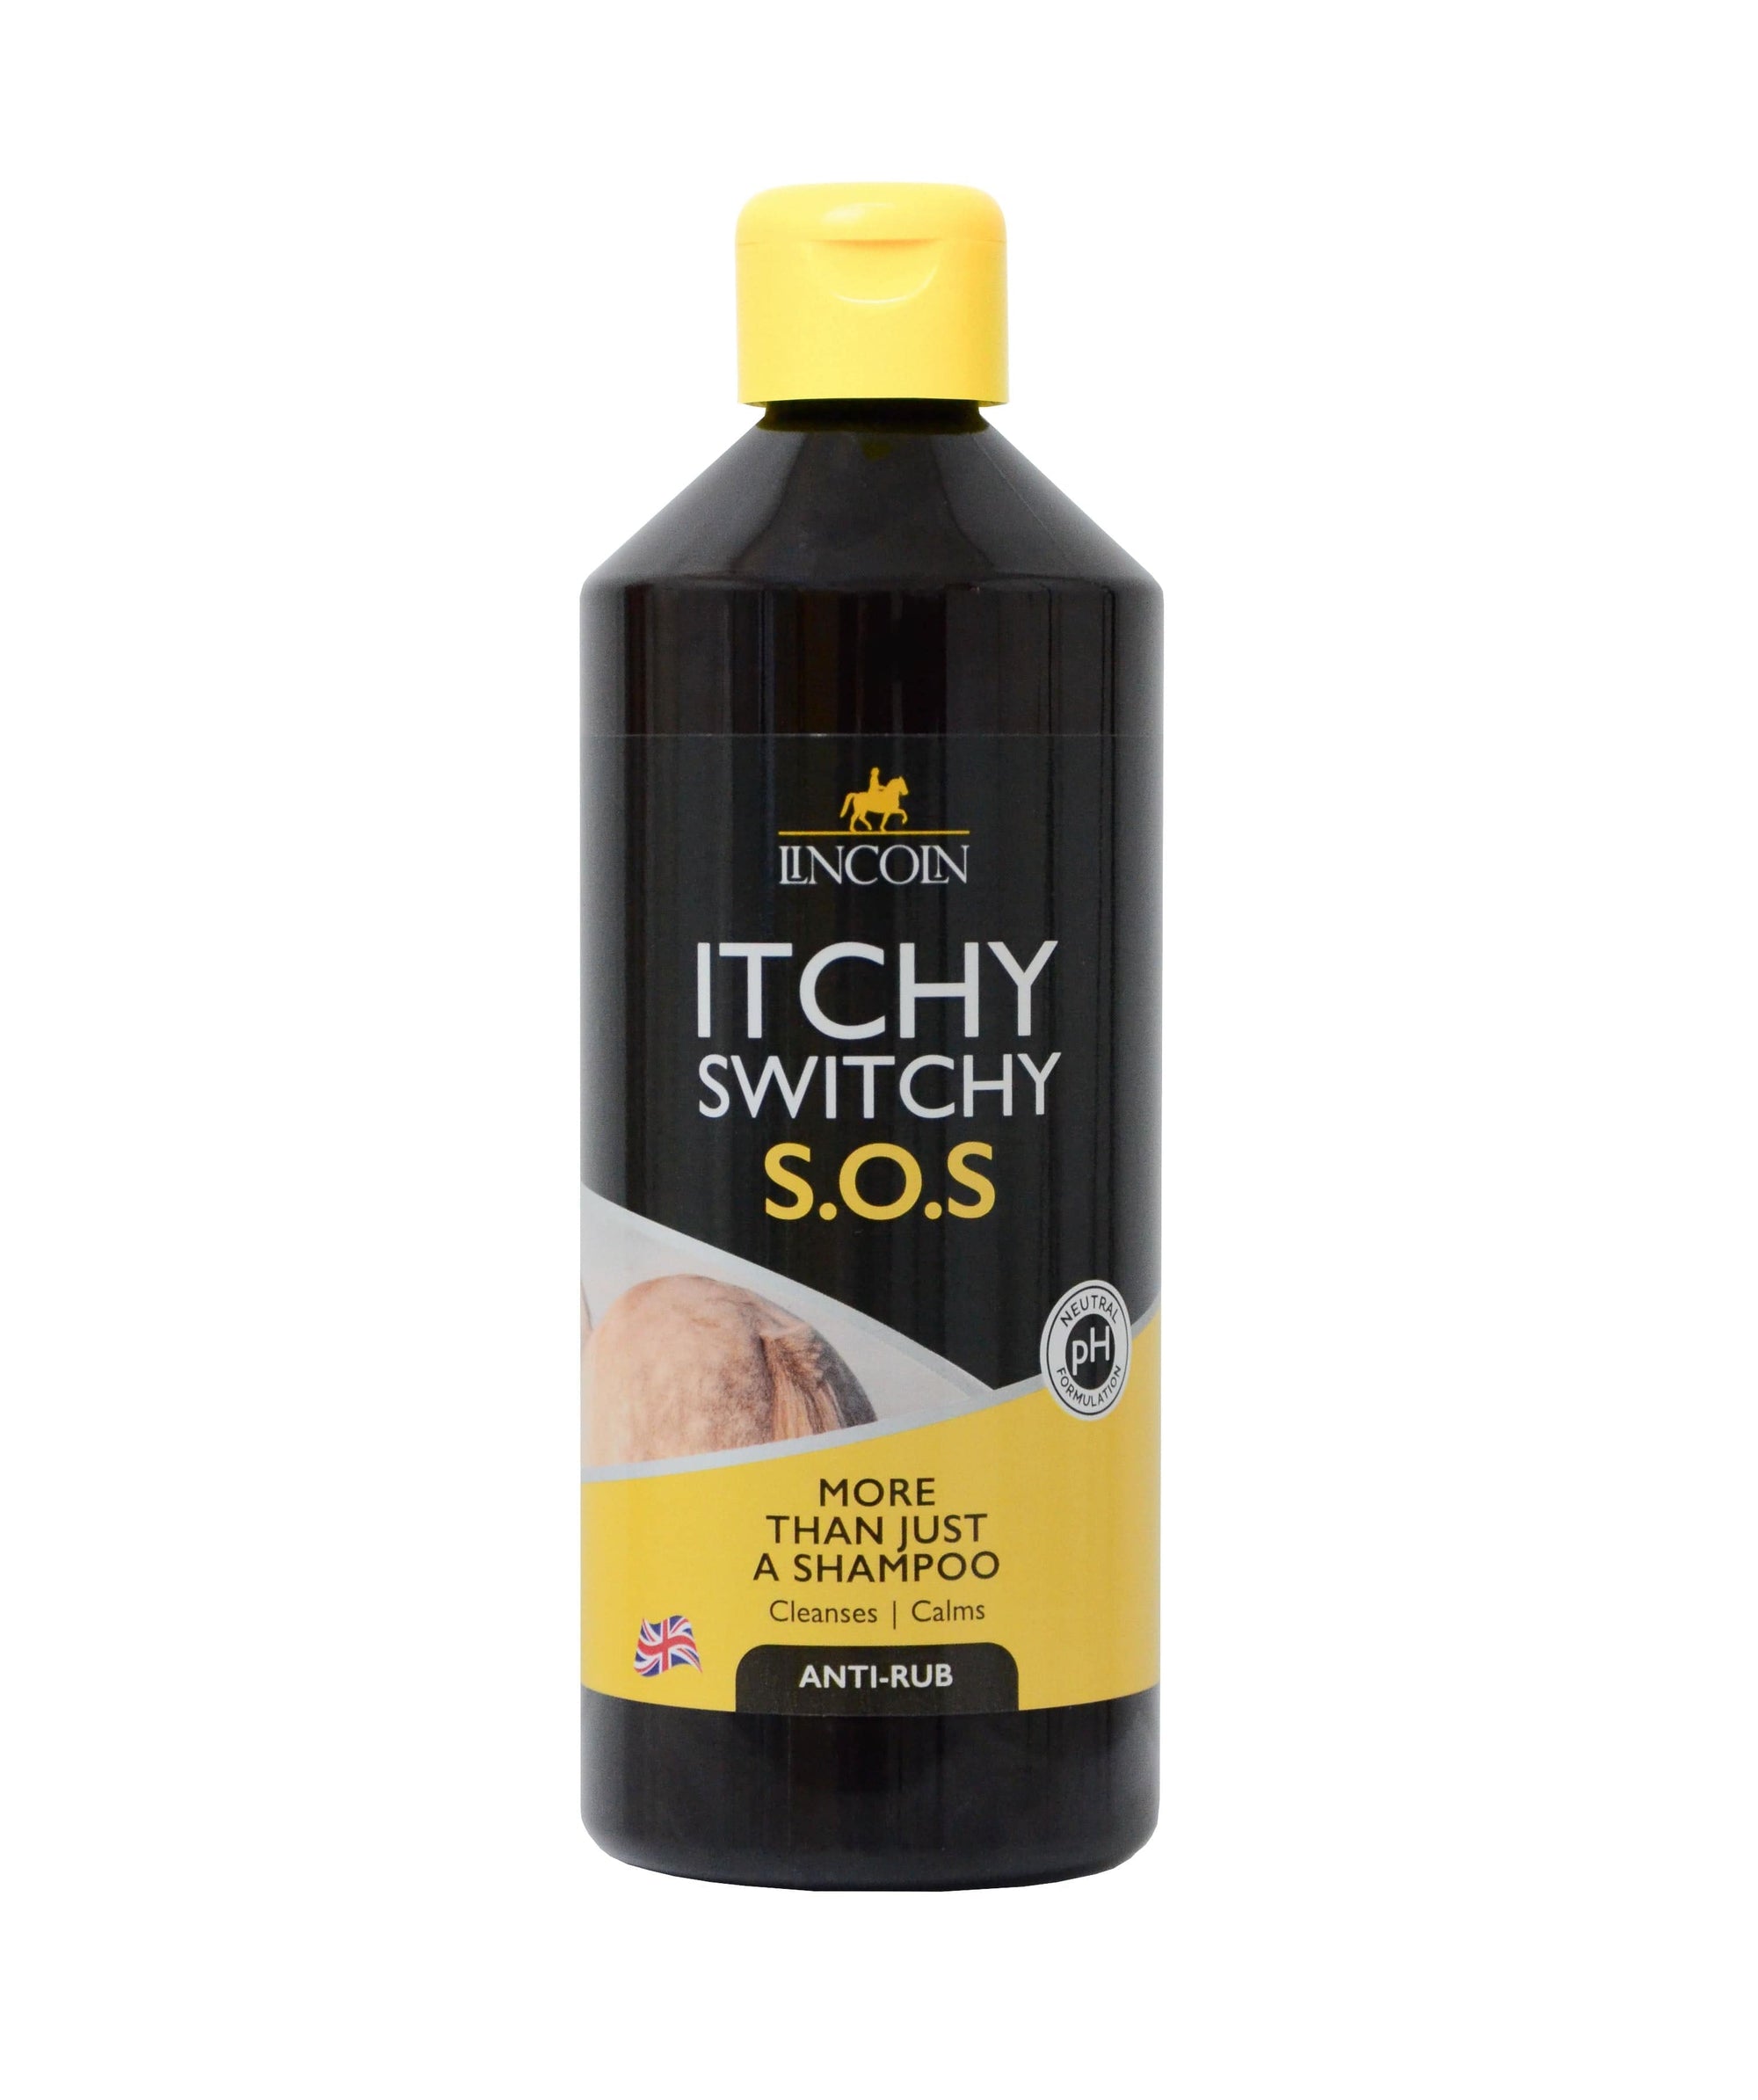 Lincoln itchy switchy s.o.s shampoo